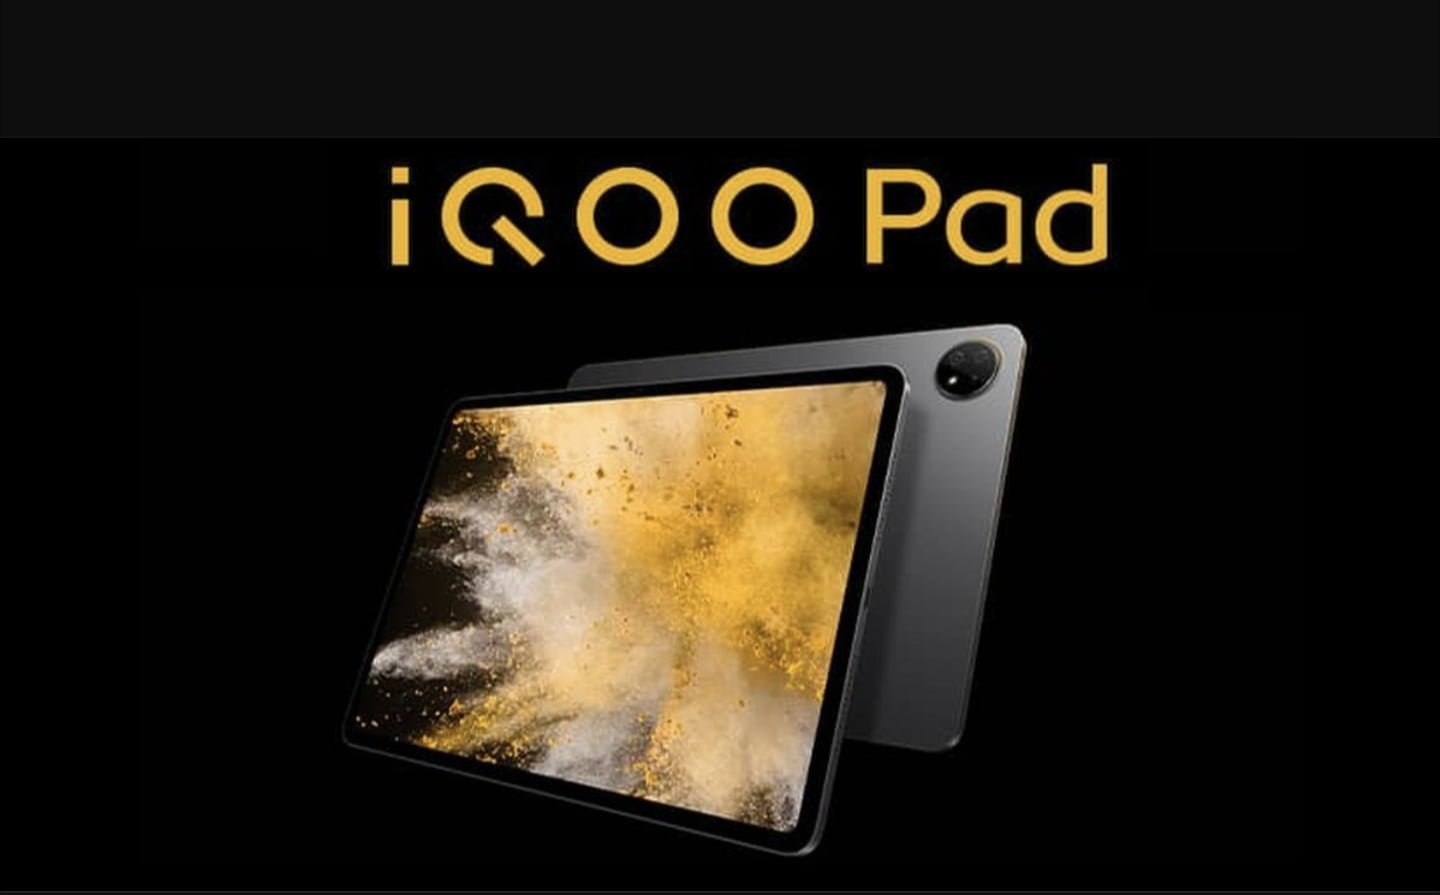 iQOO to launch iQOO Pad on May 23 with similar design and specs as the Vivo Pad 2